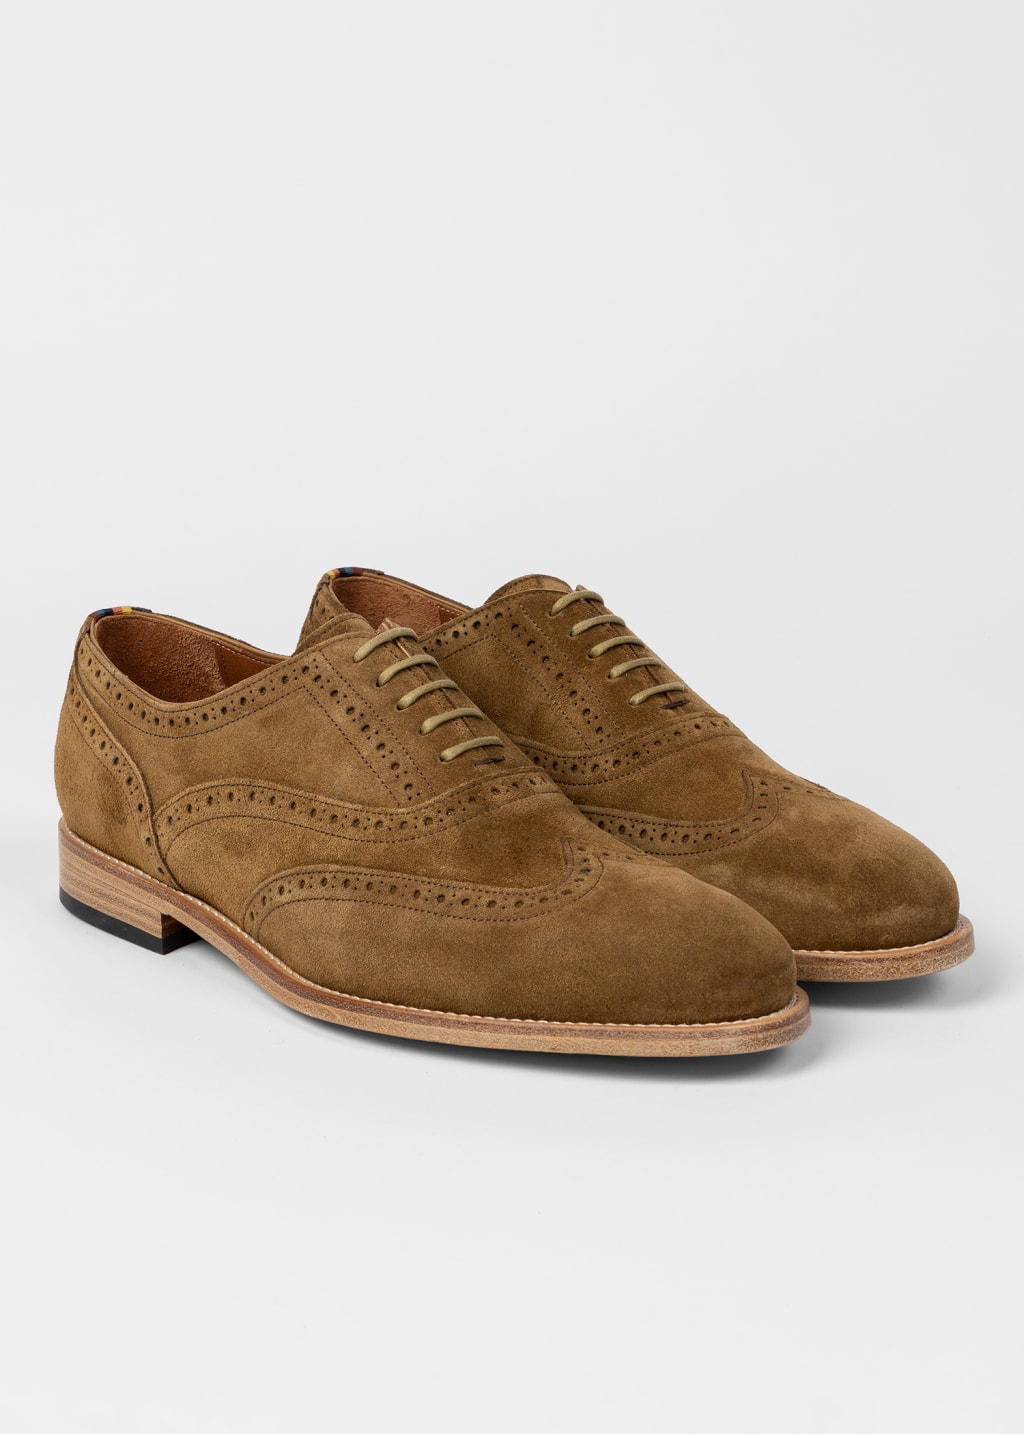 Pair View - Tan Suede 'Niccolo' Brogues Paul Smith 